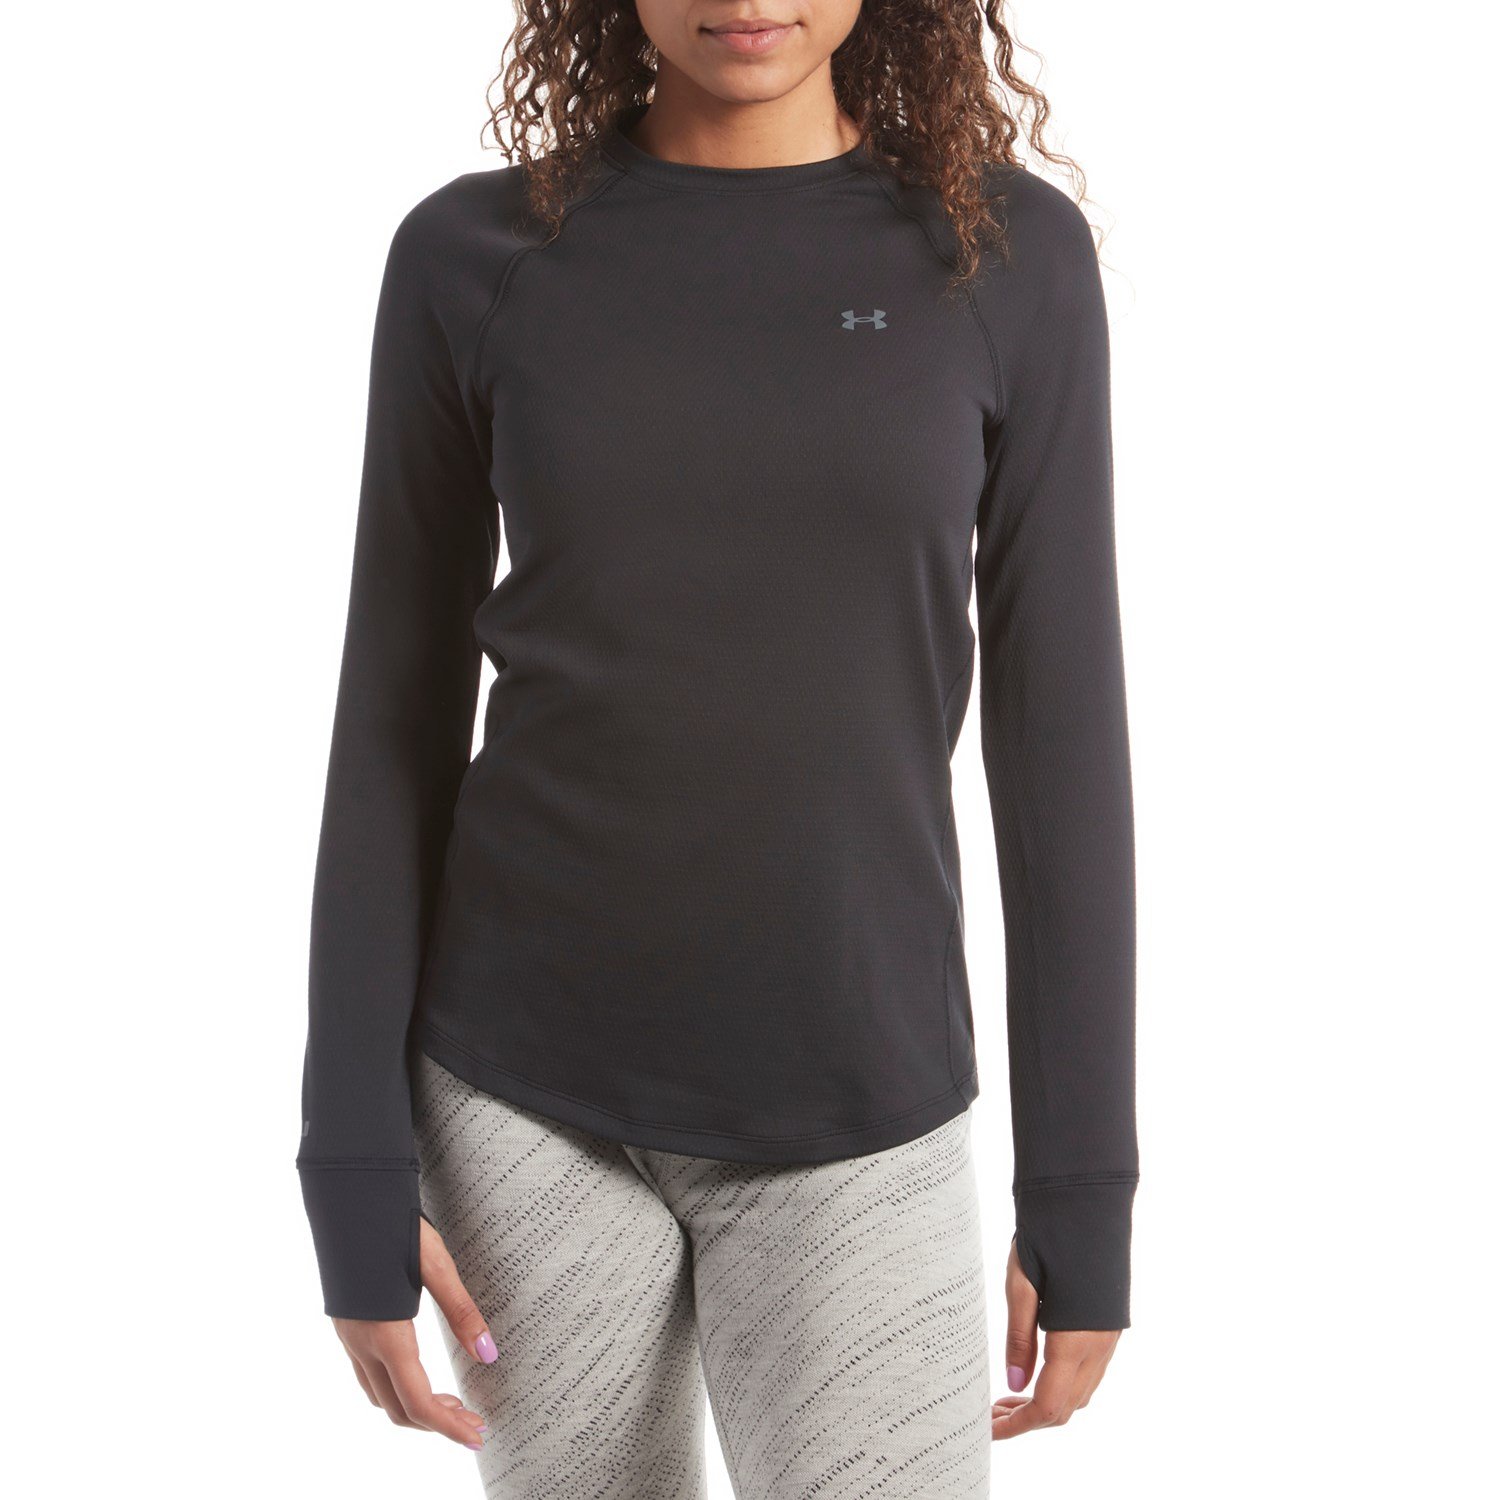 under armour base layer womens